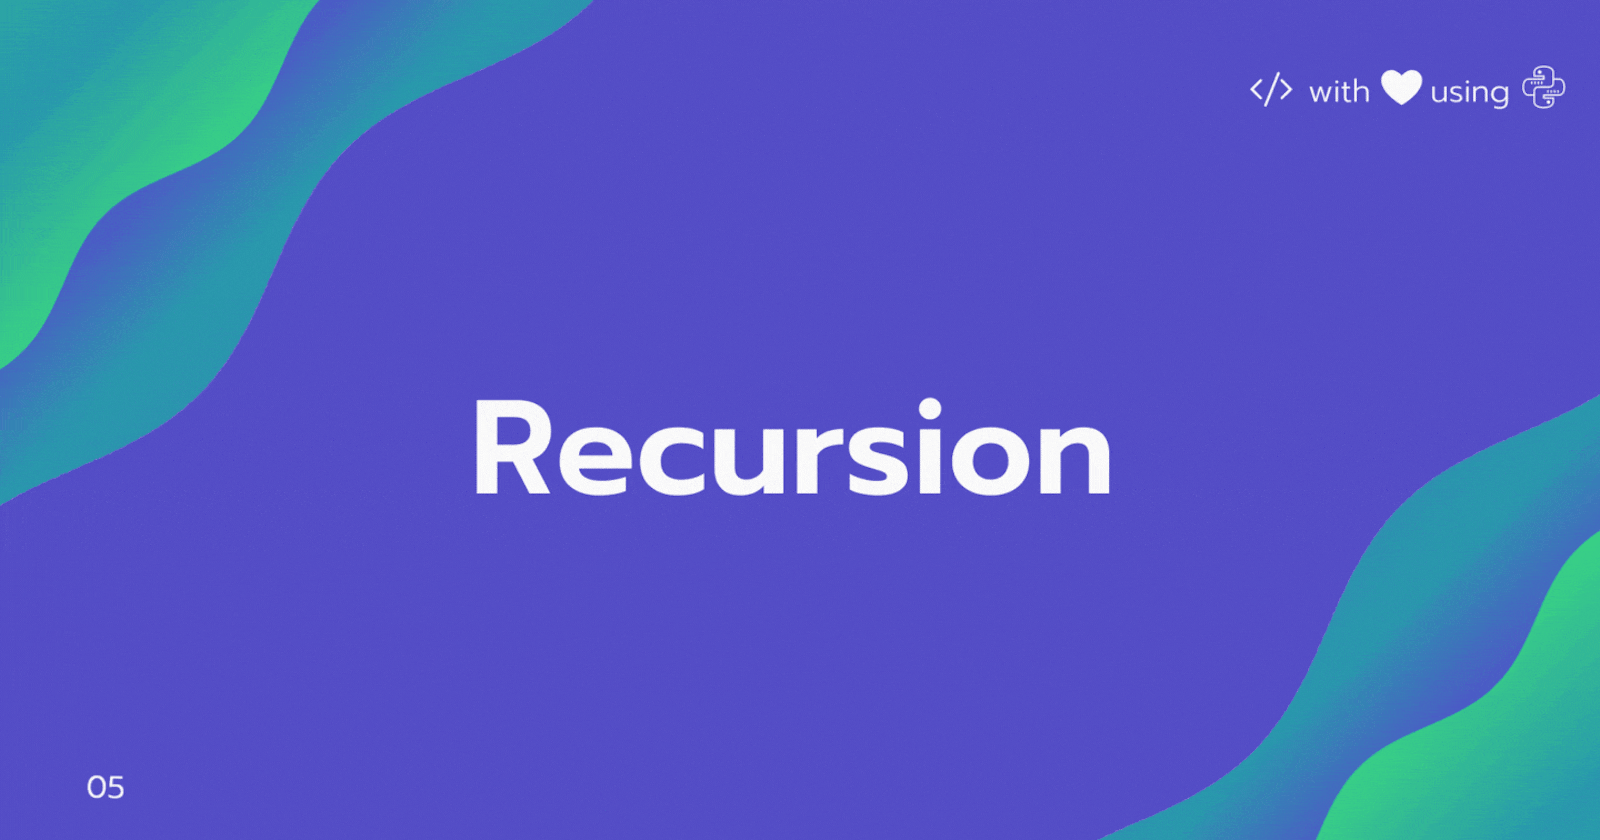 All you want to know about recursion in Python